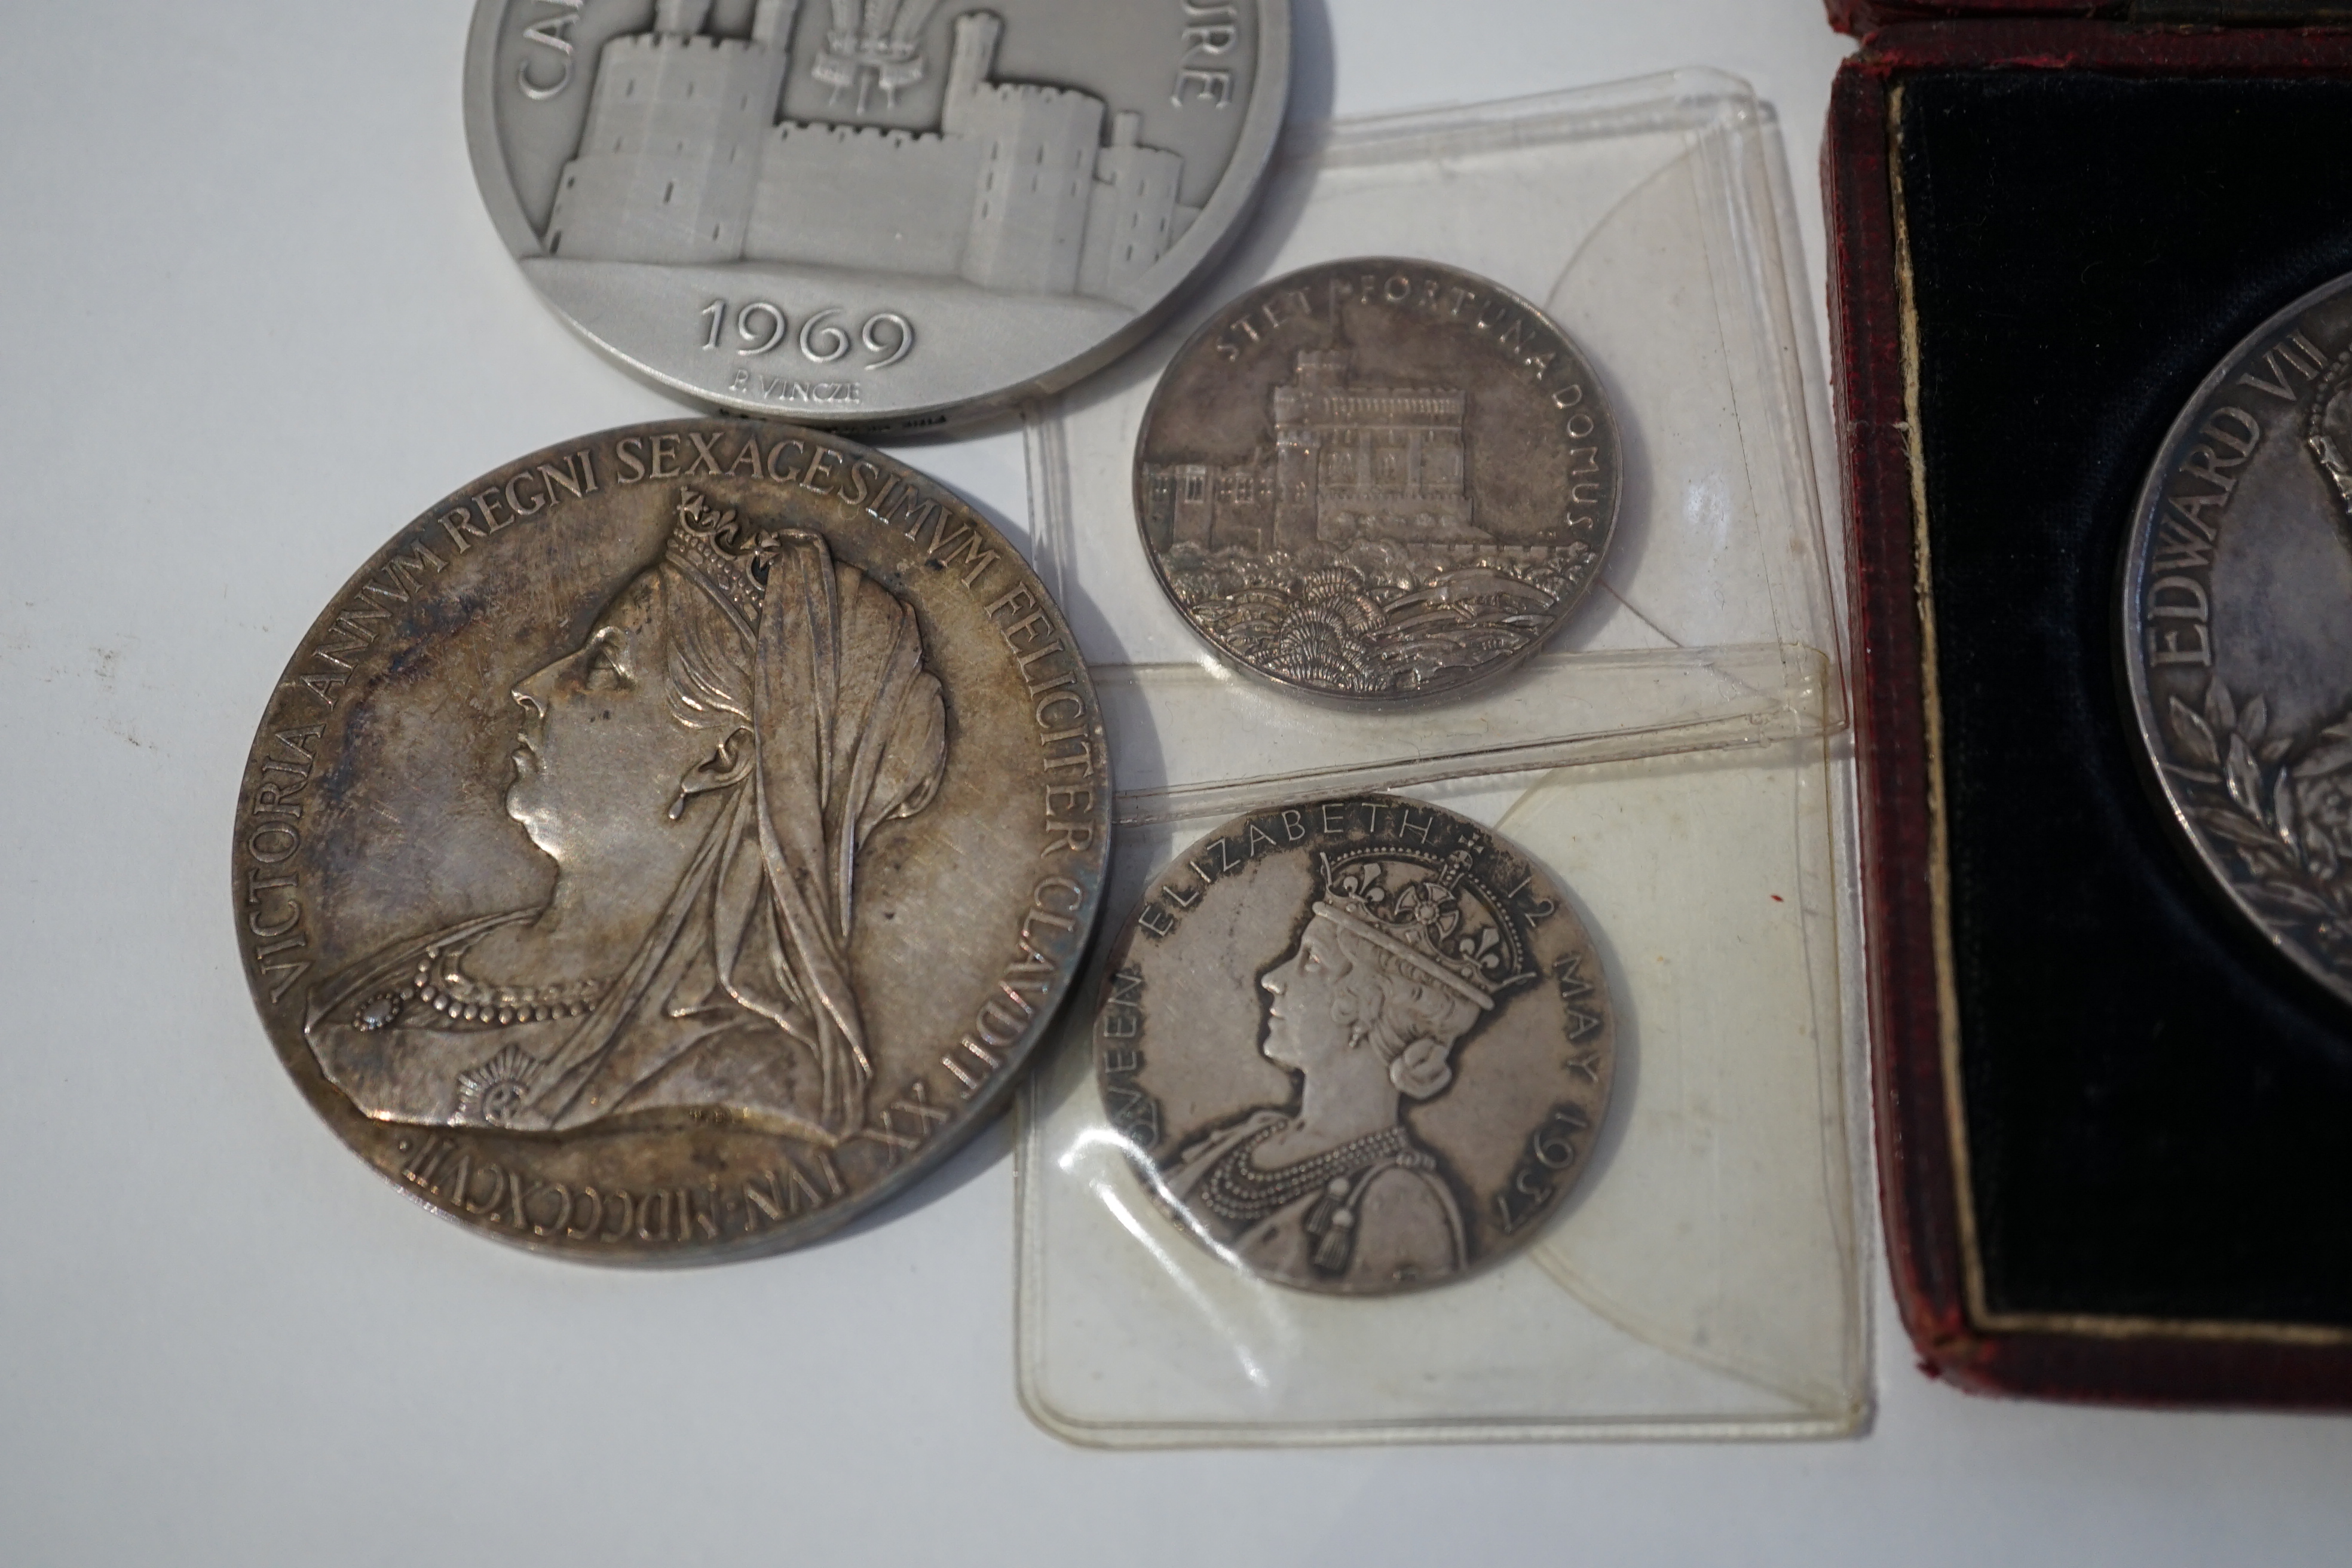 British Royal commemorative silver medals, comprising Victoria Diamond Jubilee, 1897, Edward VII Coronation 1902, cased, George V and Mary Silver Jubilee, 1935, George VI coronation 1937, Prince of Wales investiture 1969